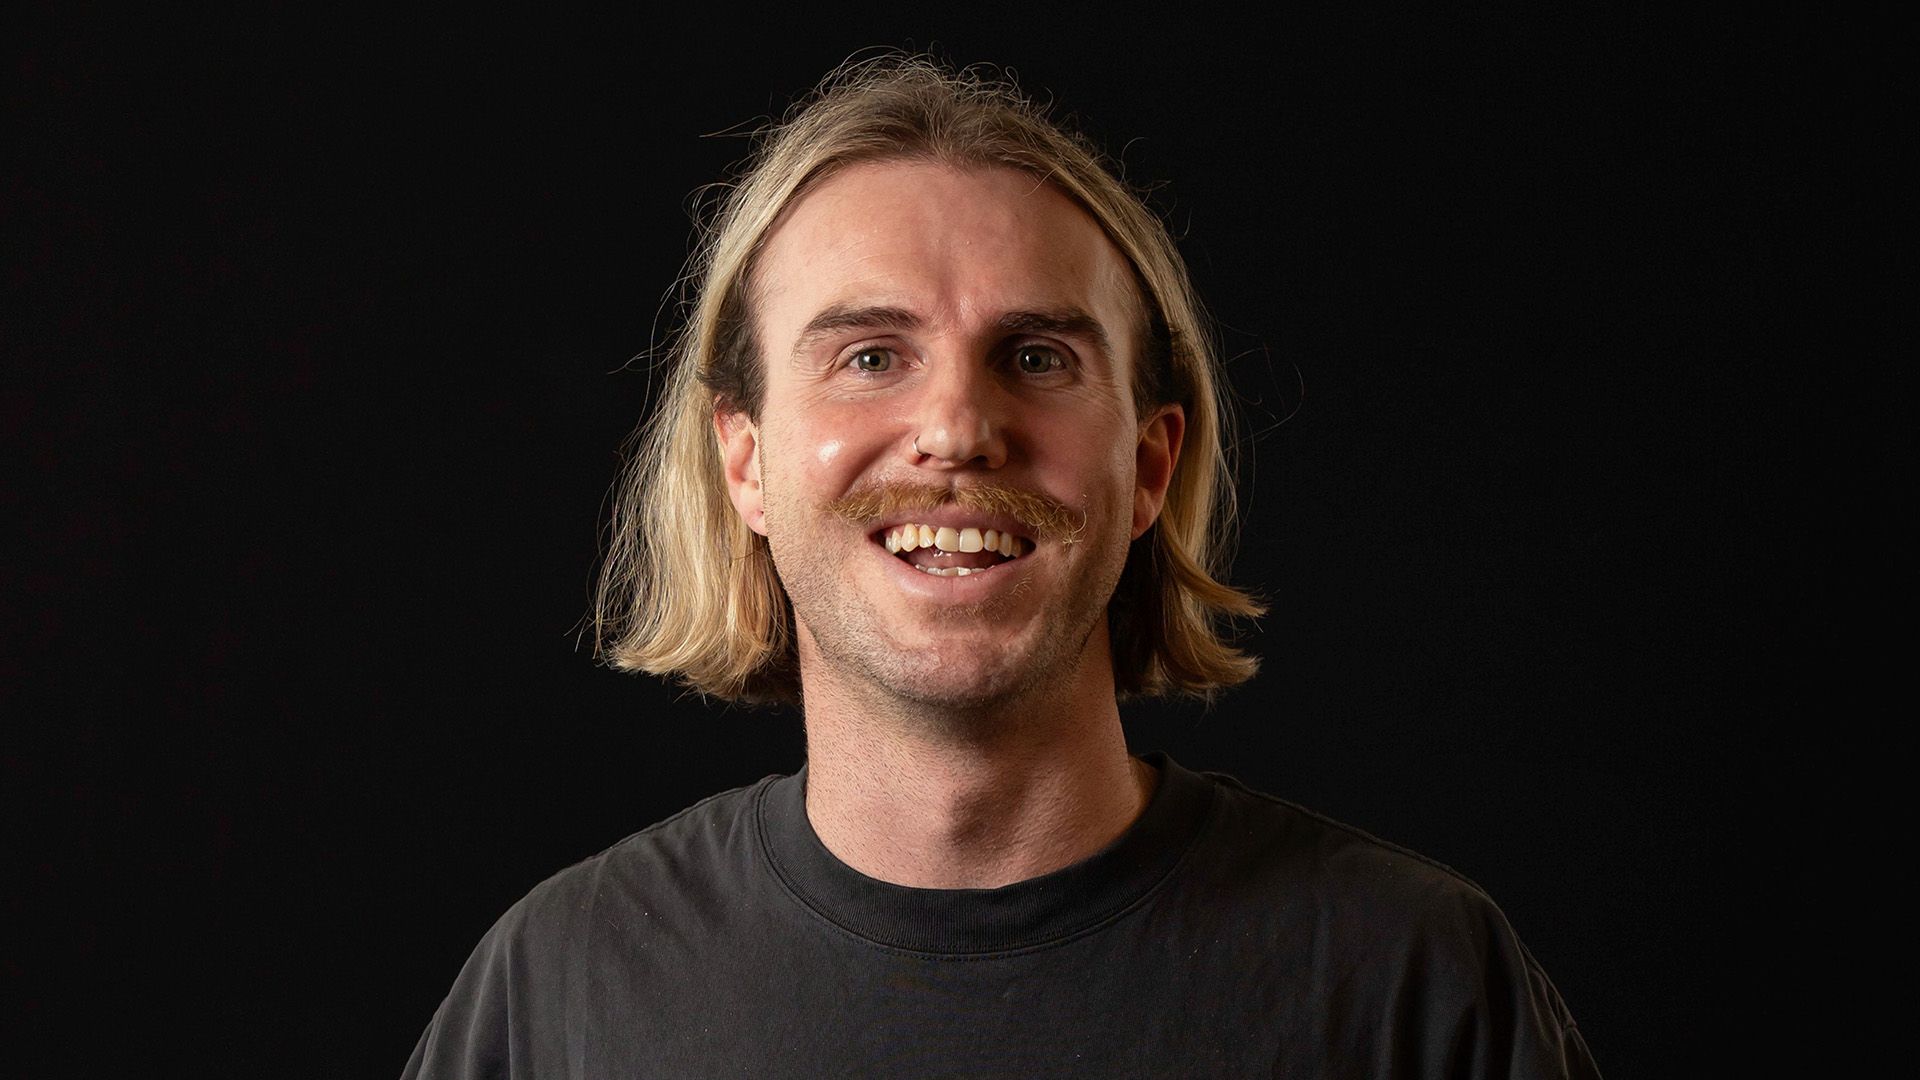 Portrait of man with long hair smiles at camera with black tshirt and background